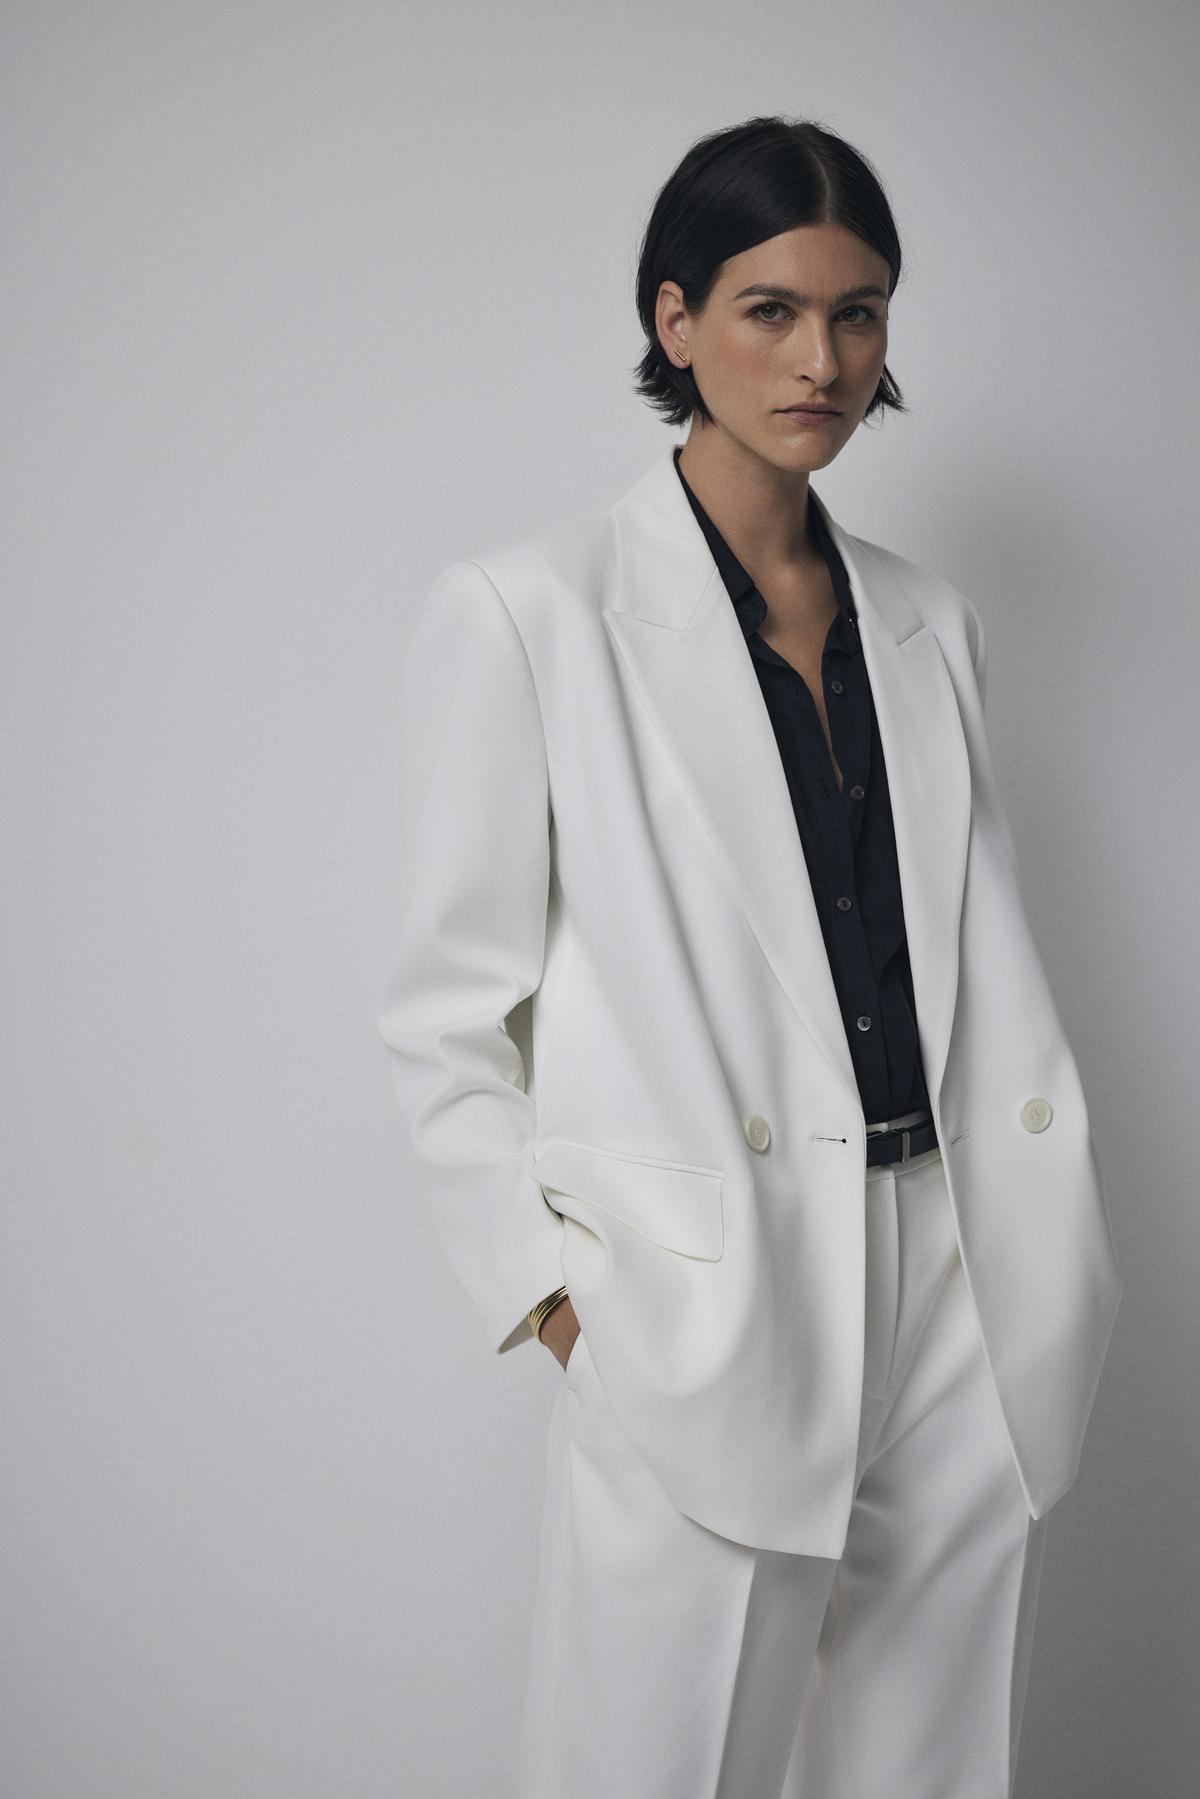 A woman wearing a structured white Fairfax blazer by Velvet by Jenny Graham and black pants.-36168664252609